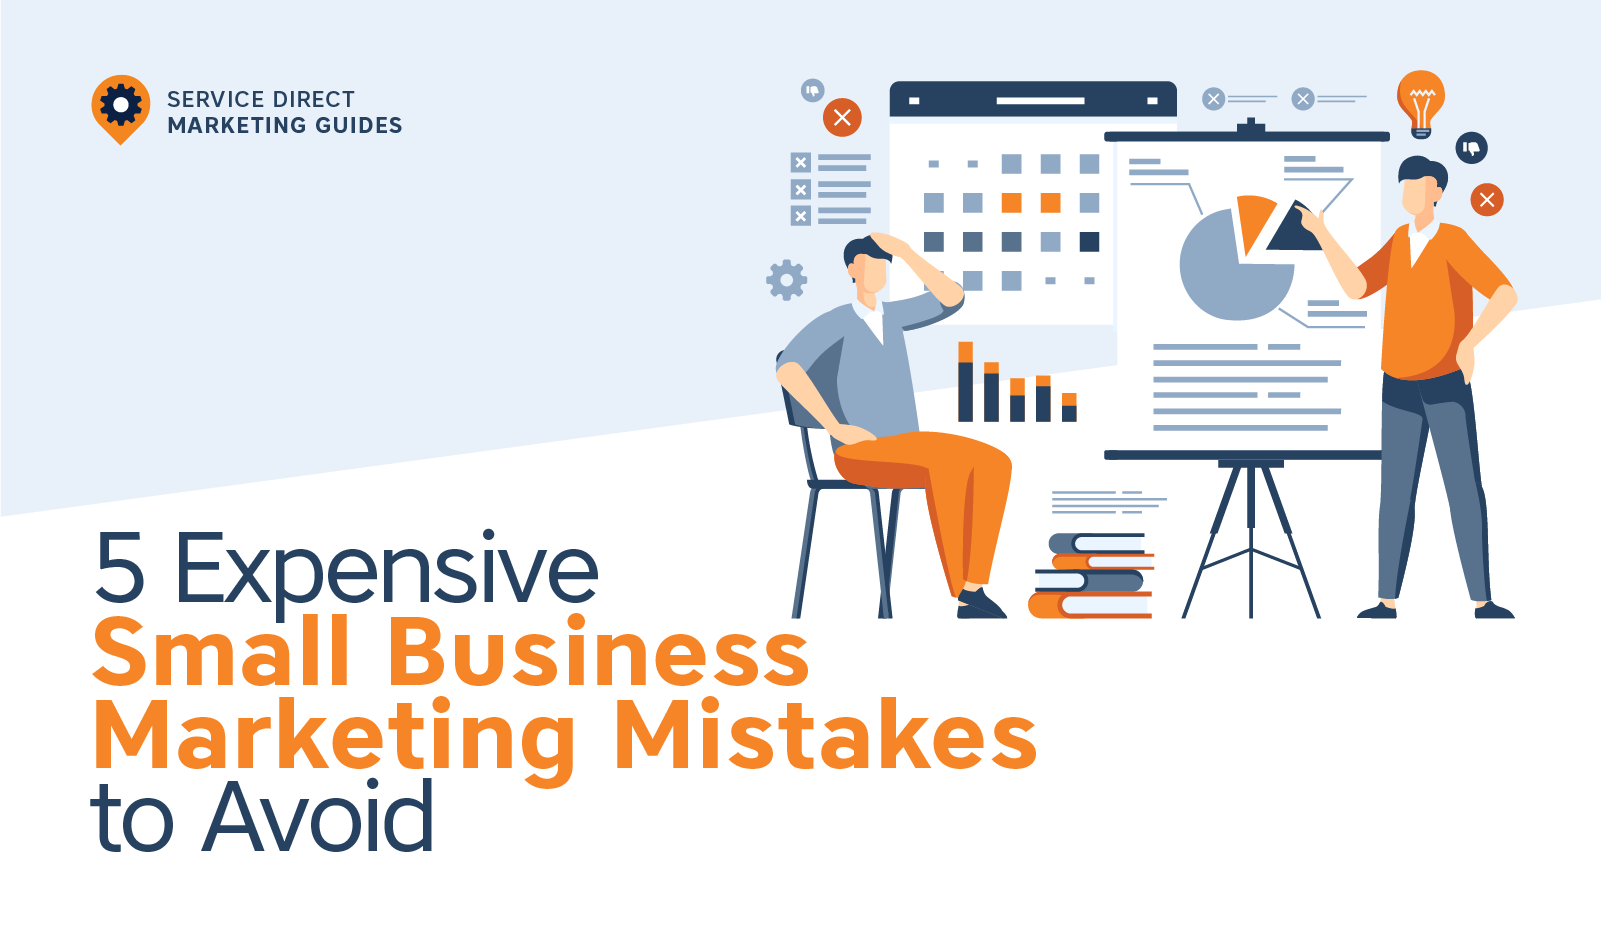 5 Expensive Small Business Marketing Mistakes to Avoid